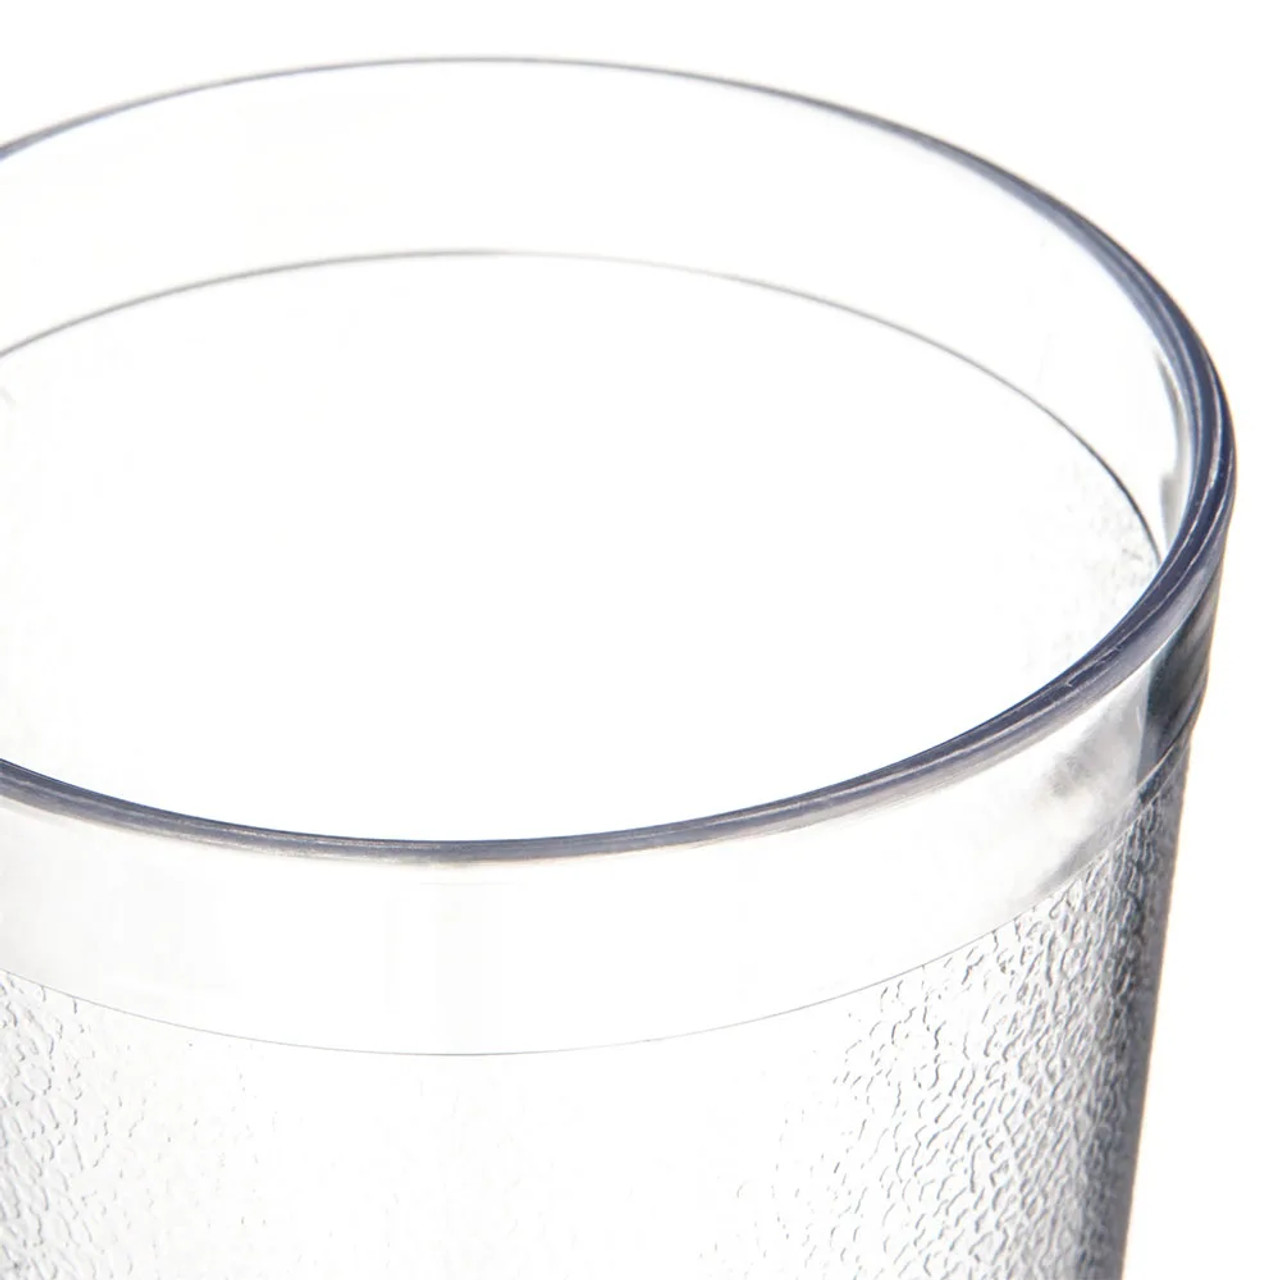 Carlisle 16 oz Clear Textured Plastic Tumbler (72/Case) -  Stackable Drinkware - Chicken Pieces